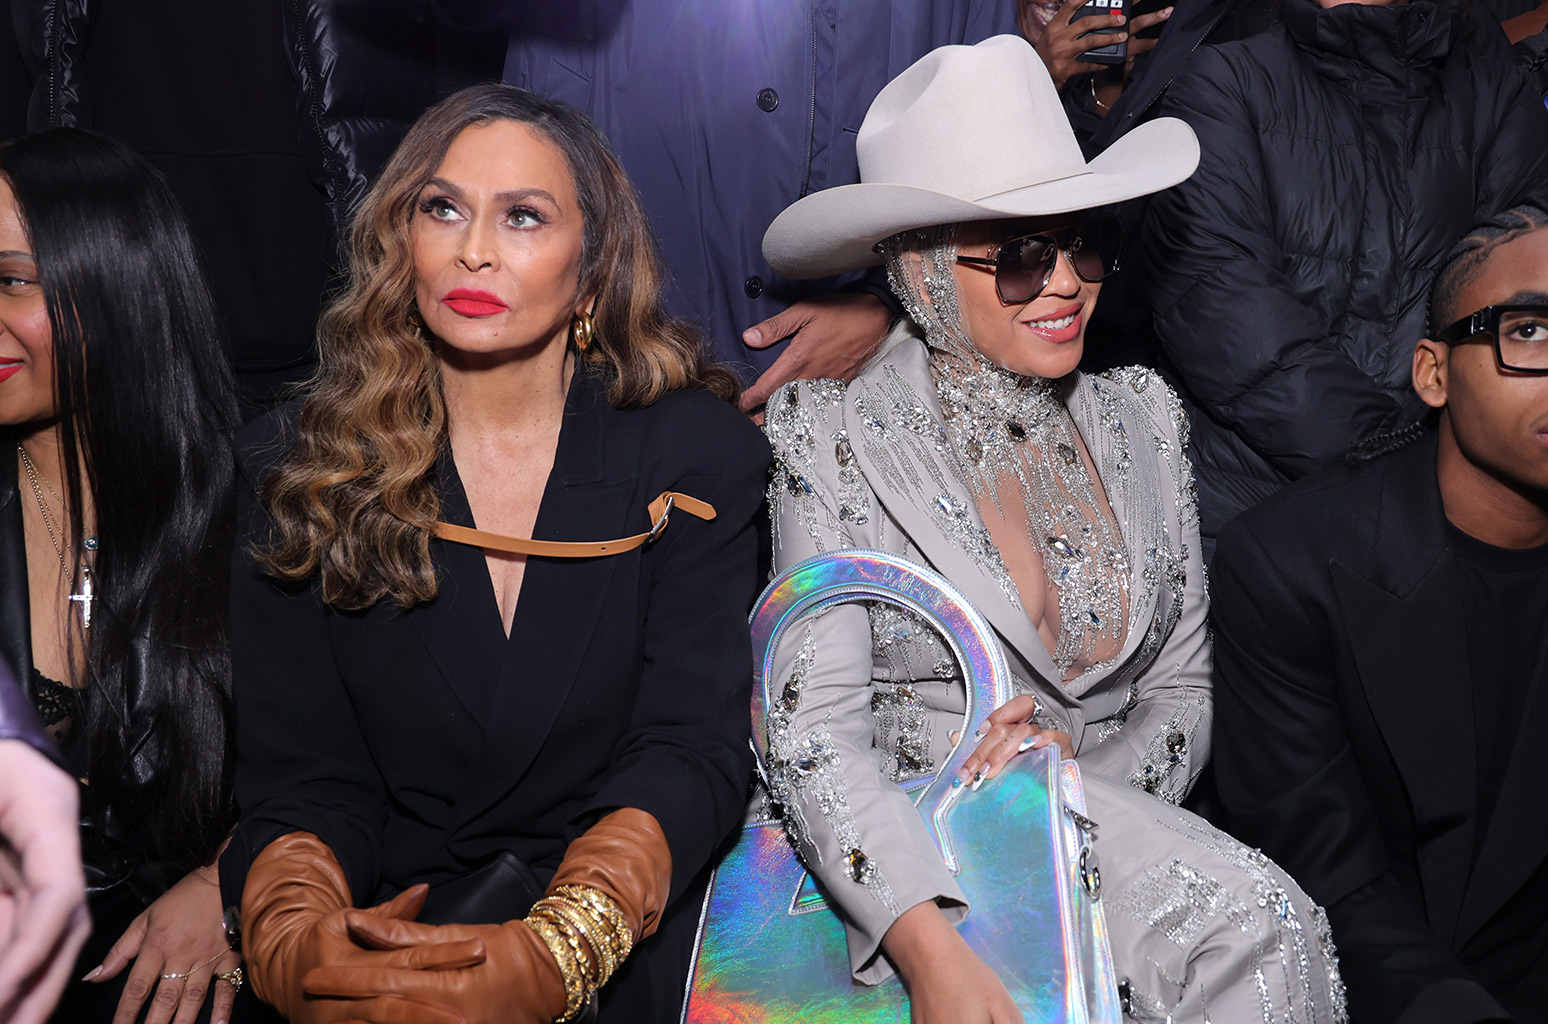 tina knowles claps back at beyoncé's country critics: ‘we have always celebrated cowboy culture'